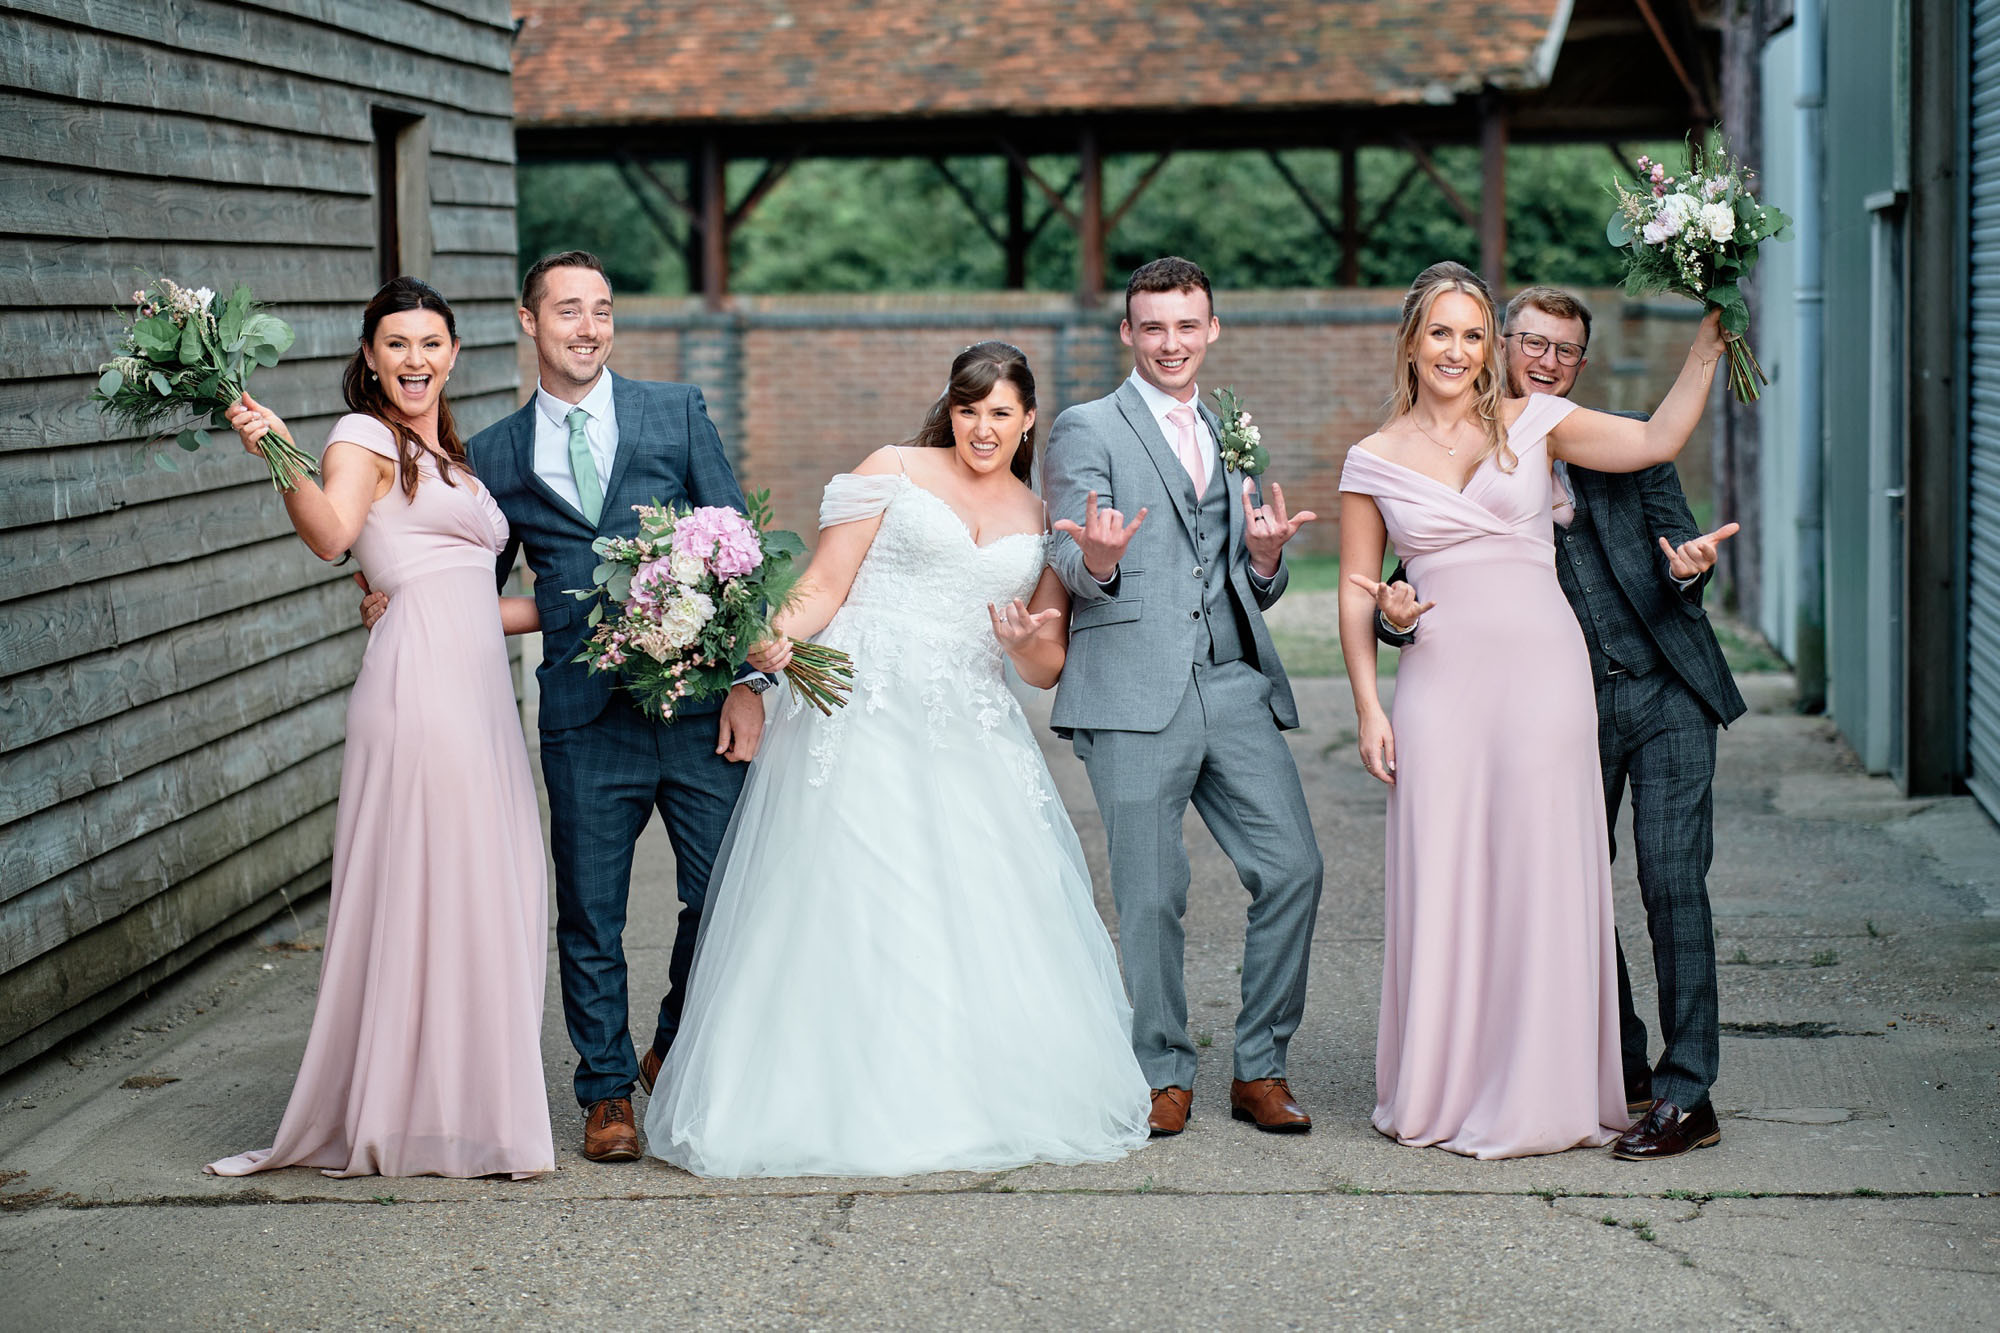 Wedding party posed photography by Howling Basset Photography in Kent